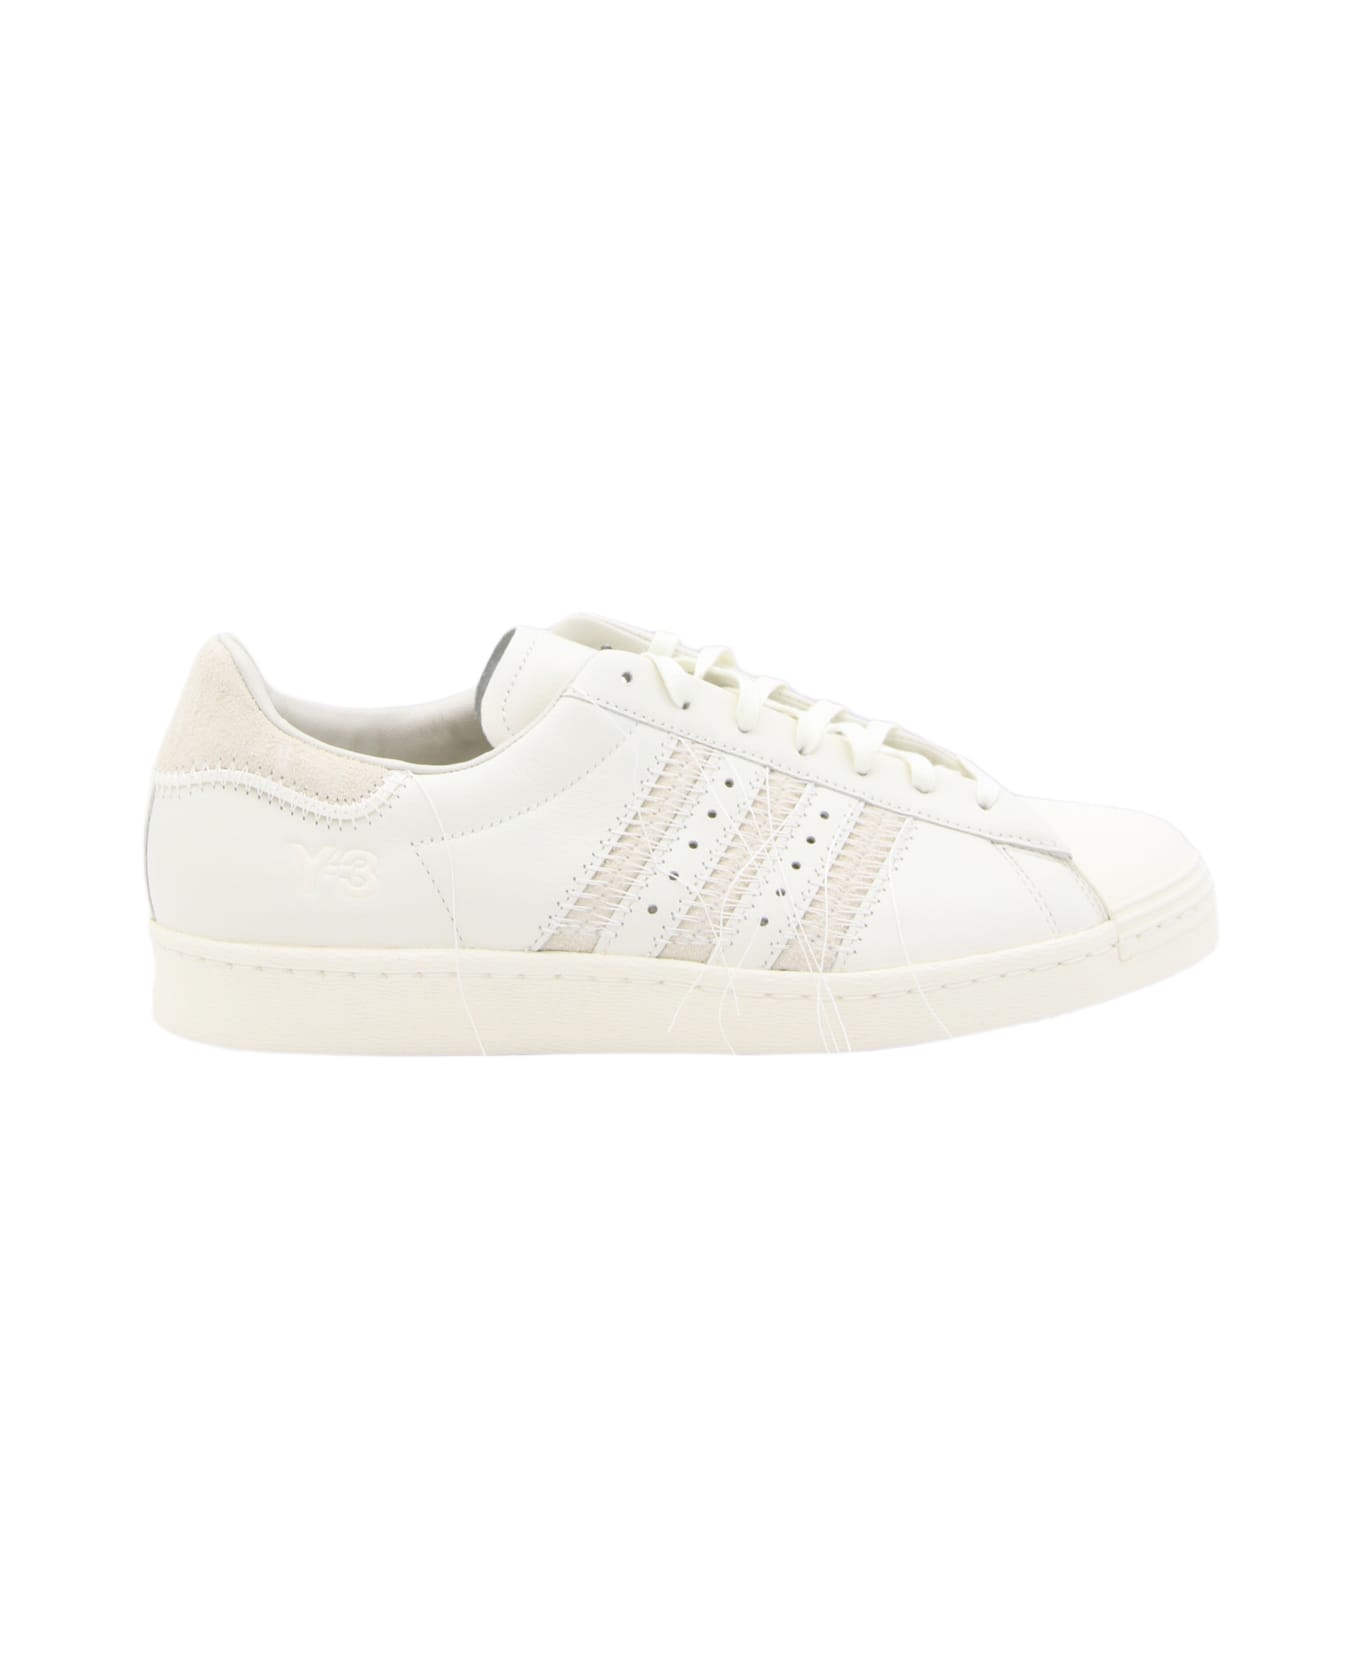 Y-3 White Leather And Beige Suede Superstar Sneakers - Beige